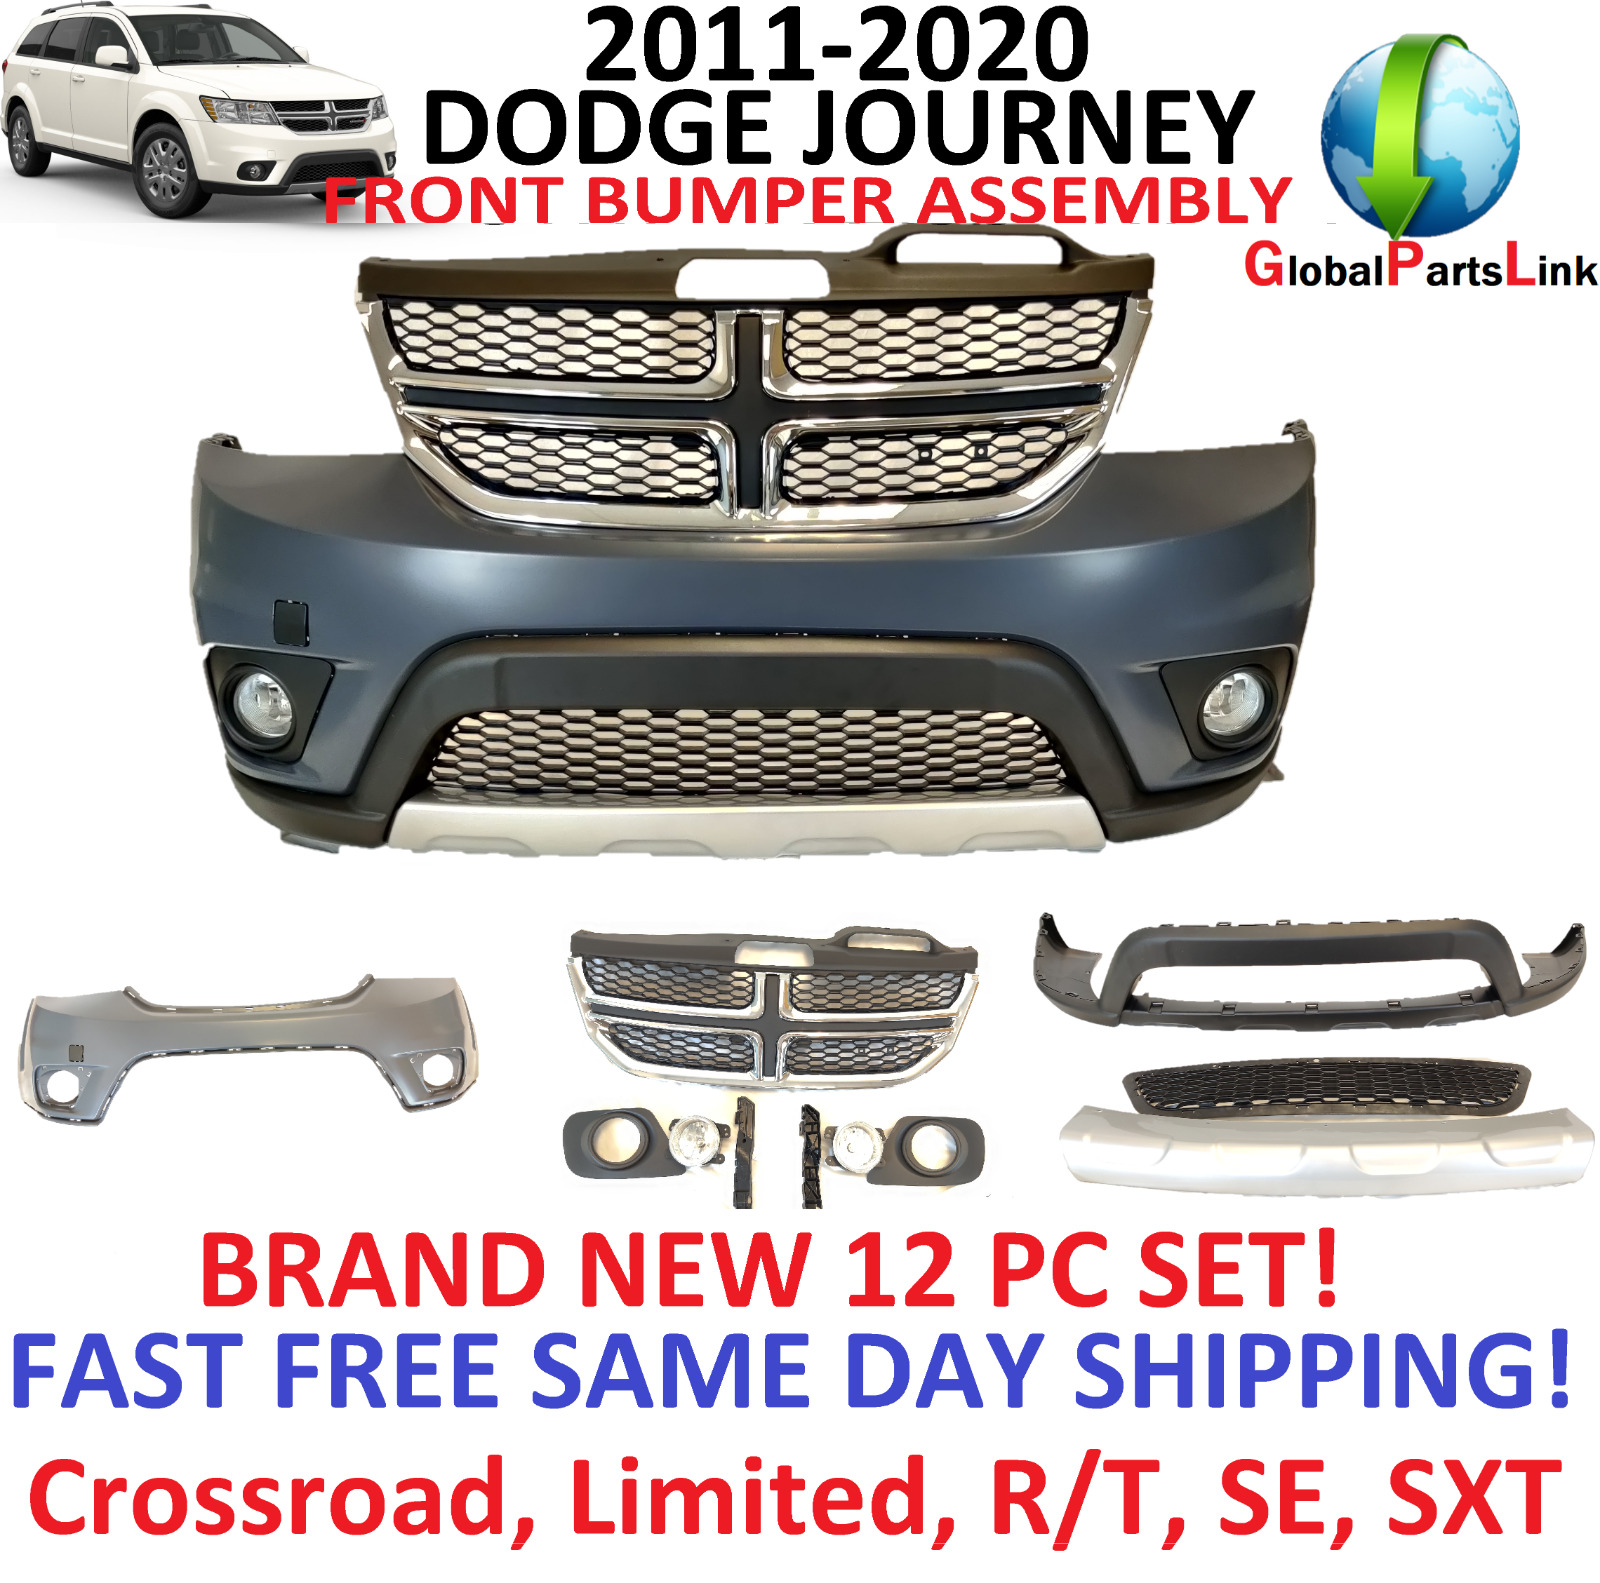 2011 - 2019 Dodge Journey Front Bumper Cover Assembly Complete with grill, fogs